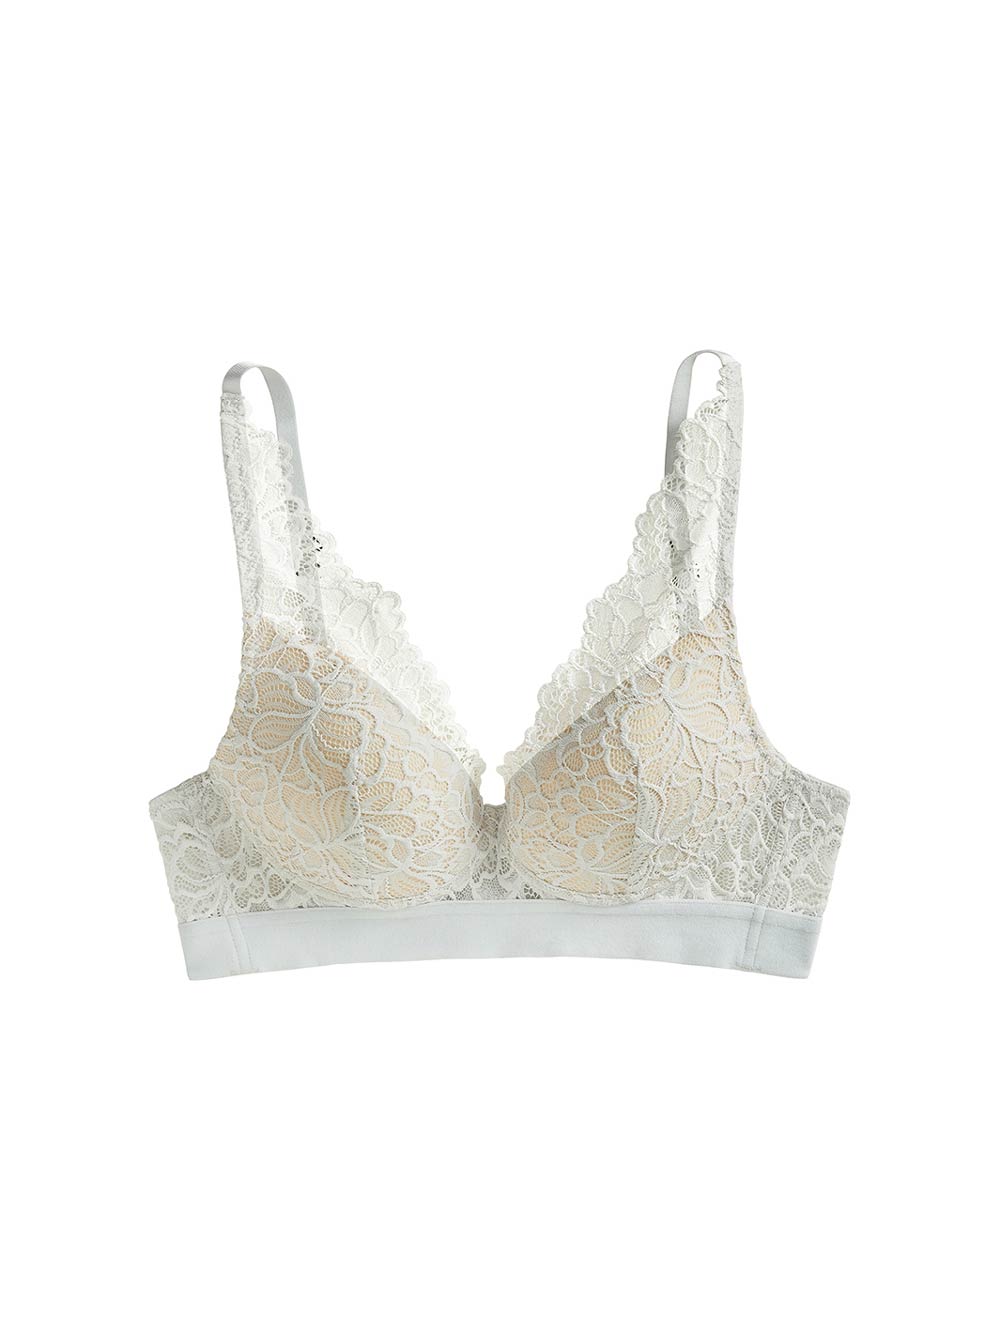 The Little Bra Company Vanessa Petite Plunge Wirefree Bra in Wisteria FINAL  SALE NORMALLY $66 - Busted Bra Shop